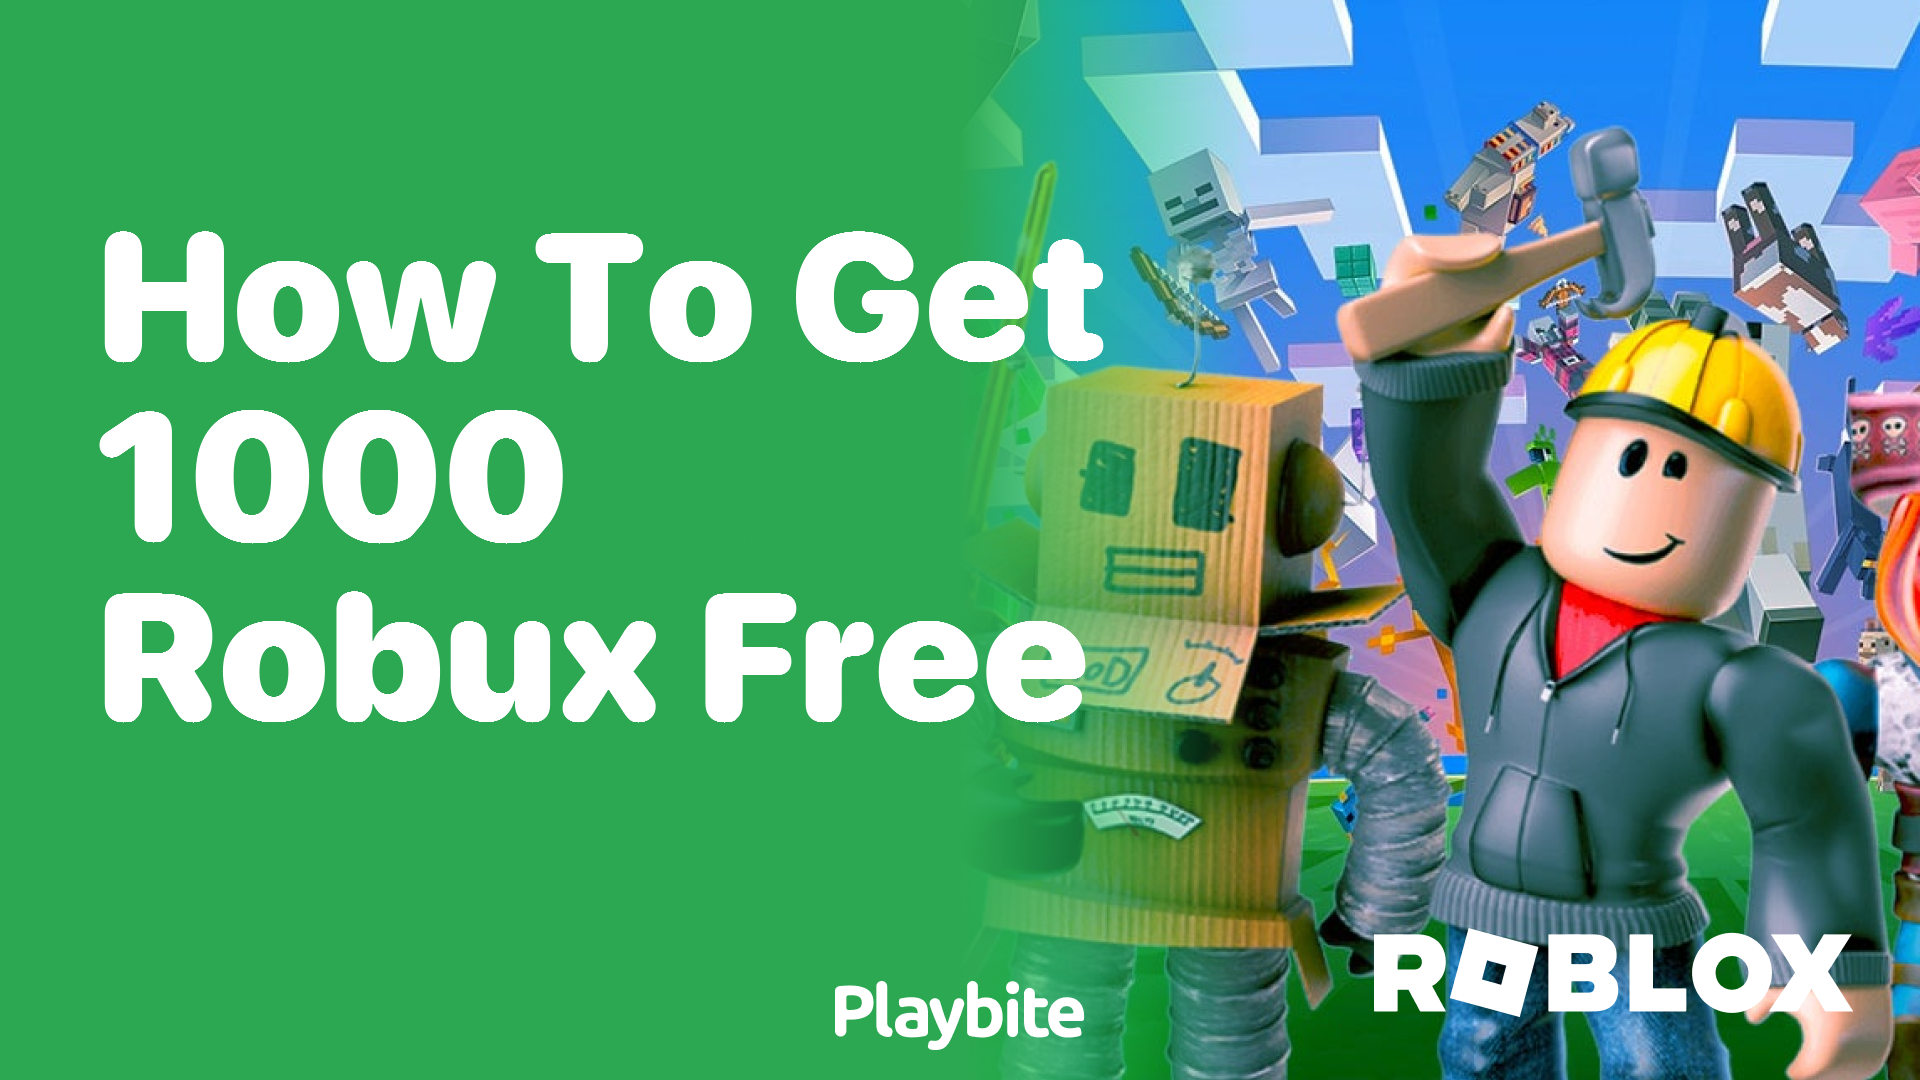 How to Get 1000 Robux for Free: A Simple Guide